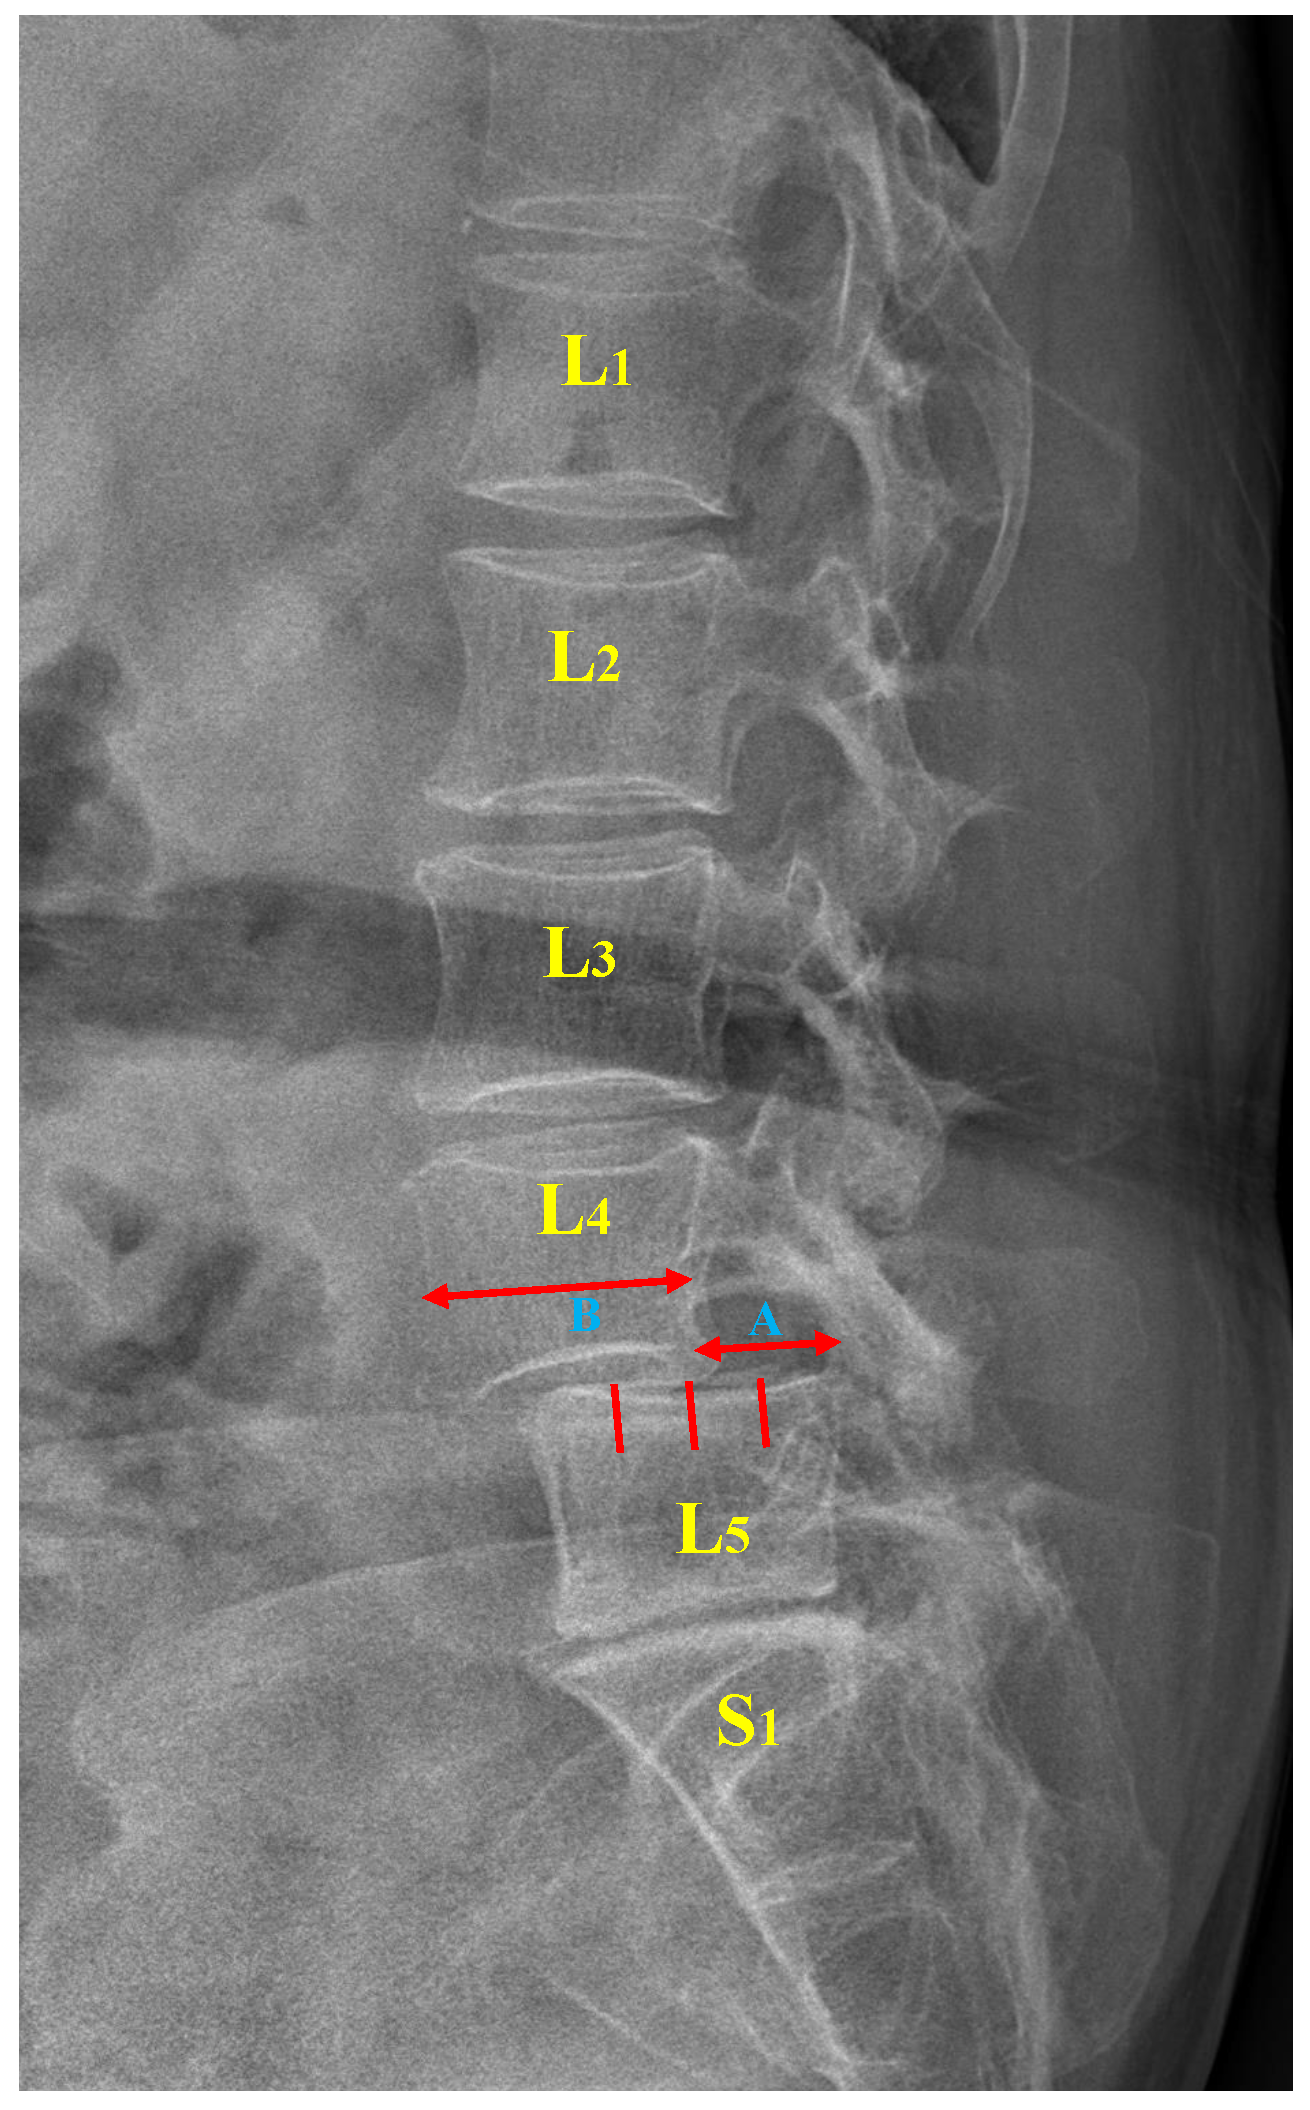 Inferior lumbar triangle, Radiology Reference Article